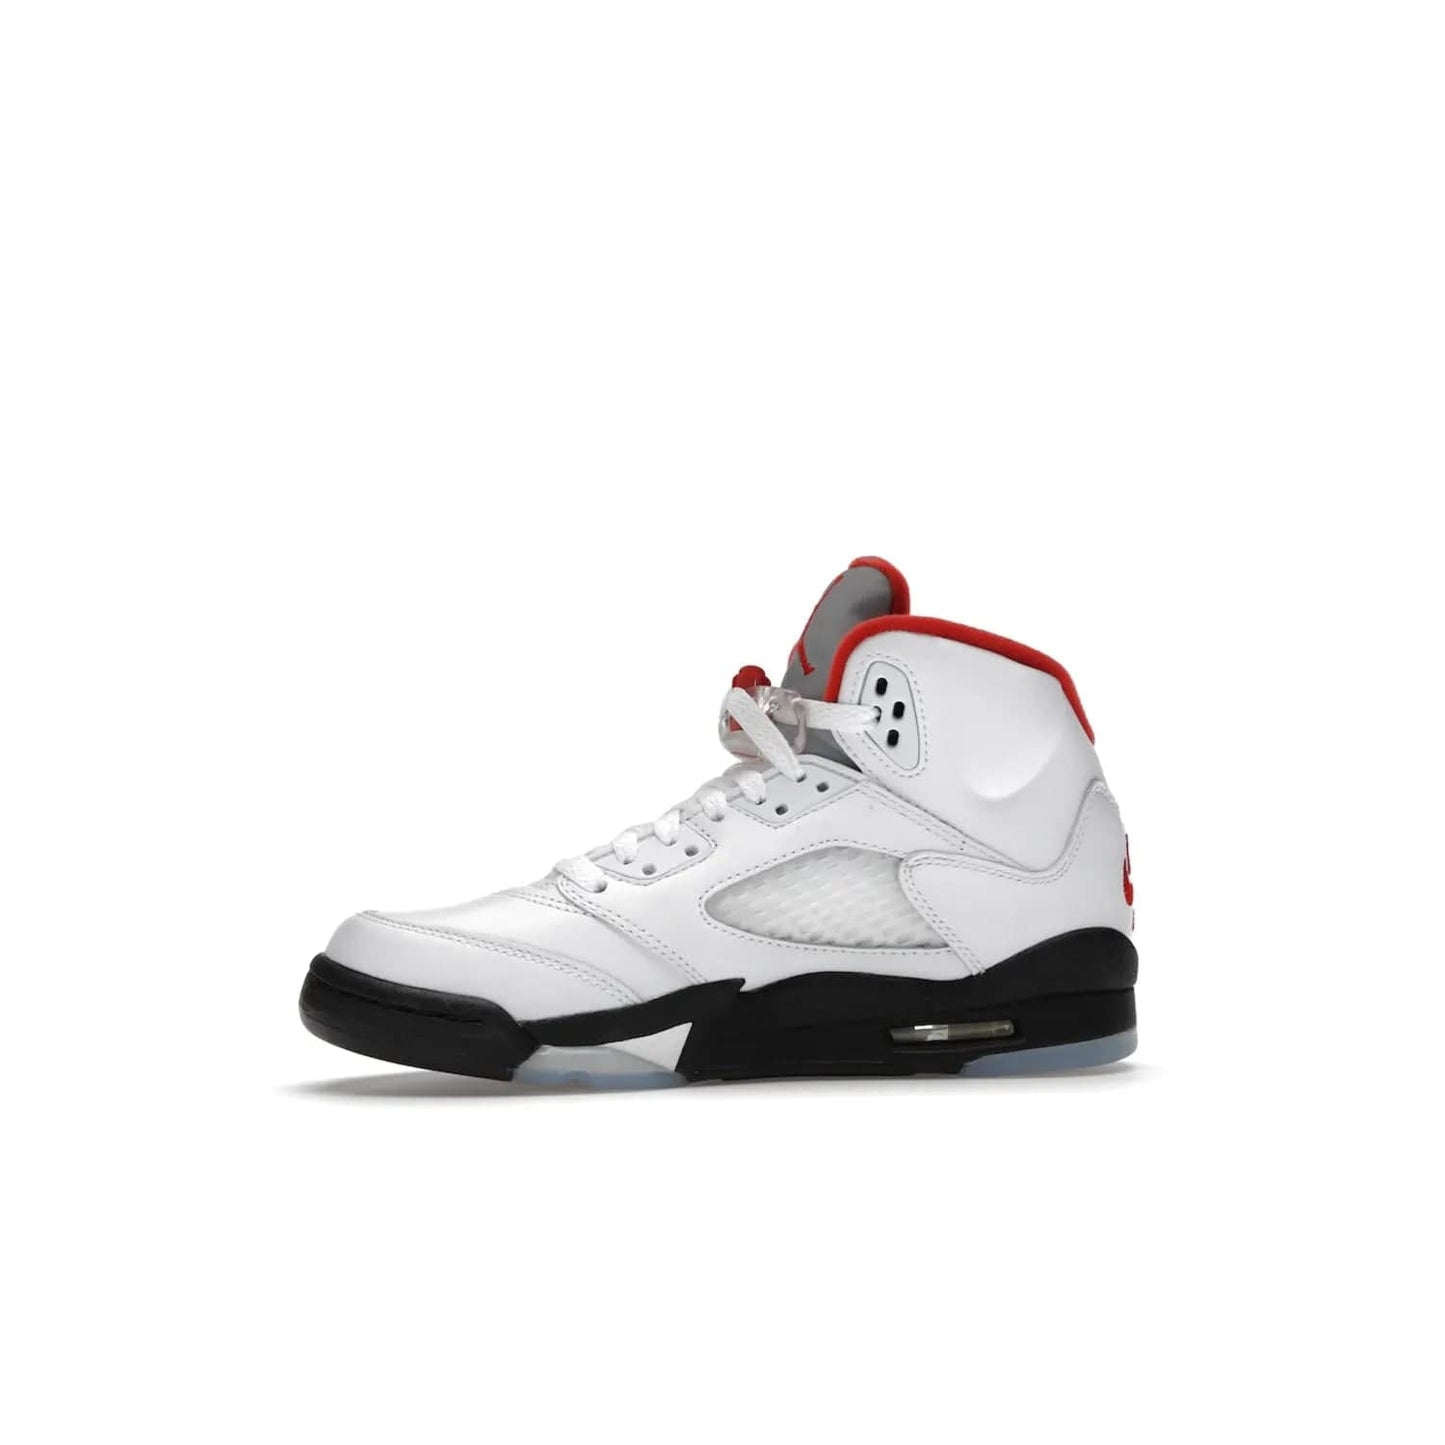 Jordan 5 Retro Fire Red Silver Tongue (2020) (GS) - Image 18 - Only at www.BallersClubKickz.com - A stylish option for any grade schooler. The Air Jordan 5 Retro Fire Red Silver Tongue 2020 GS features a combination of four hues, premium white leather, a clear mesh mid-upper and a reflective silver tongue. An icy translucent blue outsole completes the look. Available on May 2, $150.